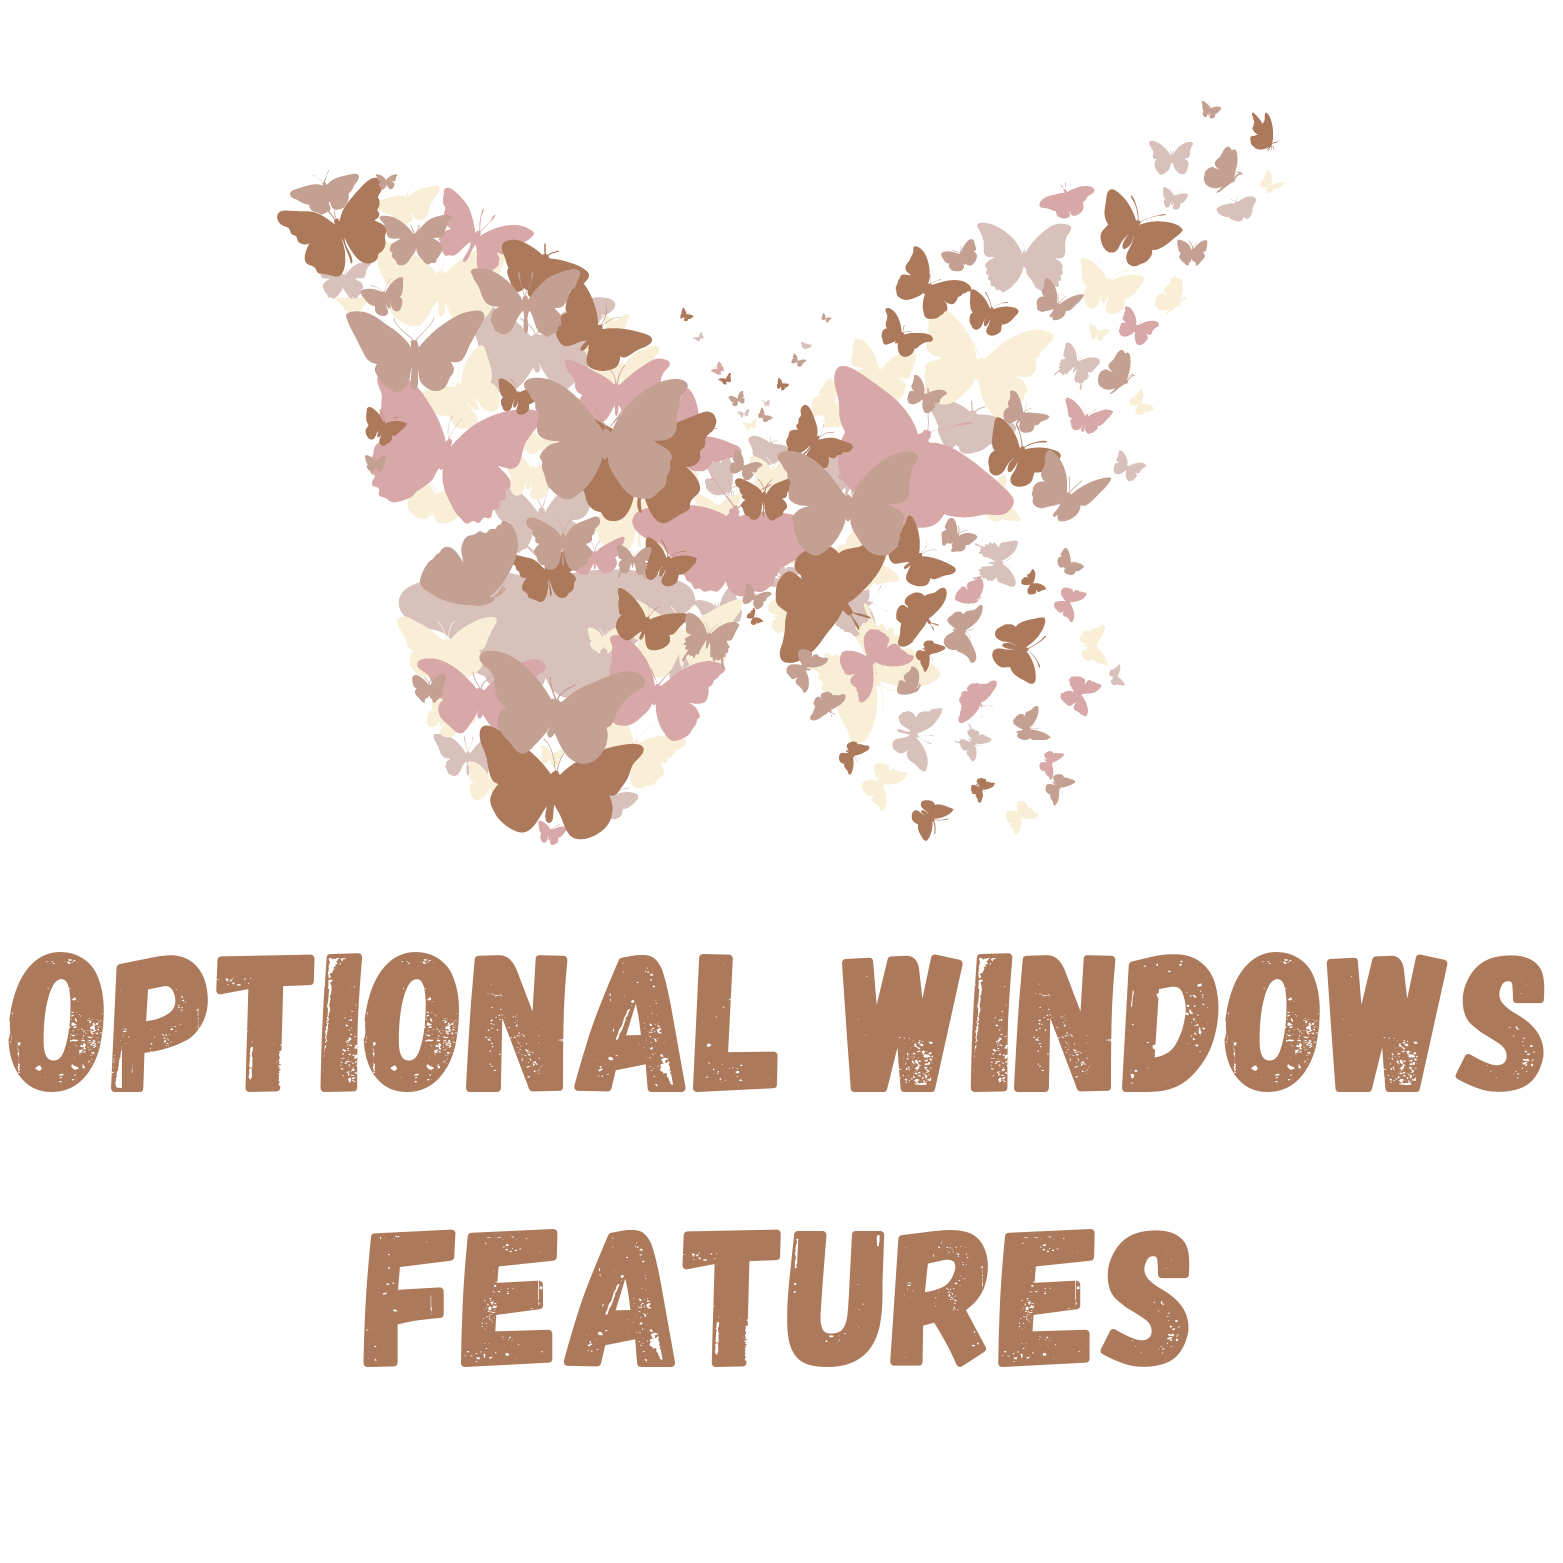 Optional Windows Features - Harden Windows Security GitHub repository